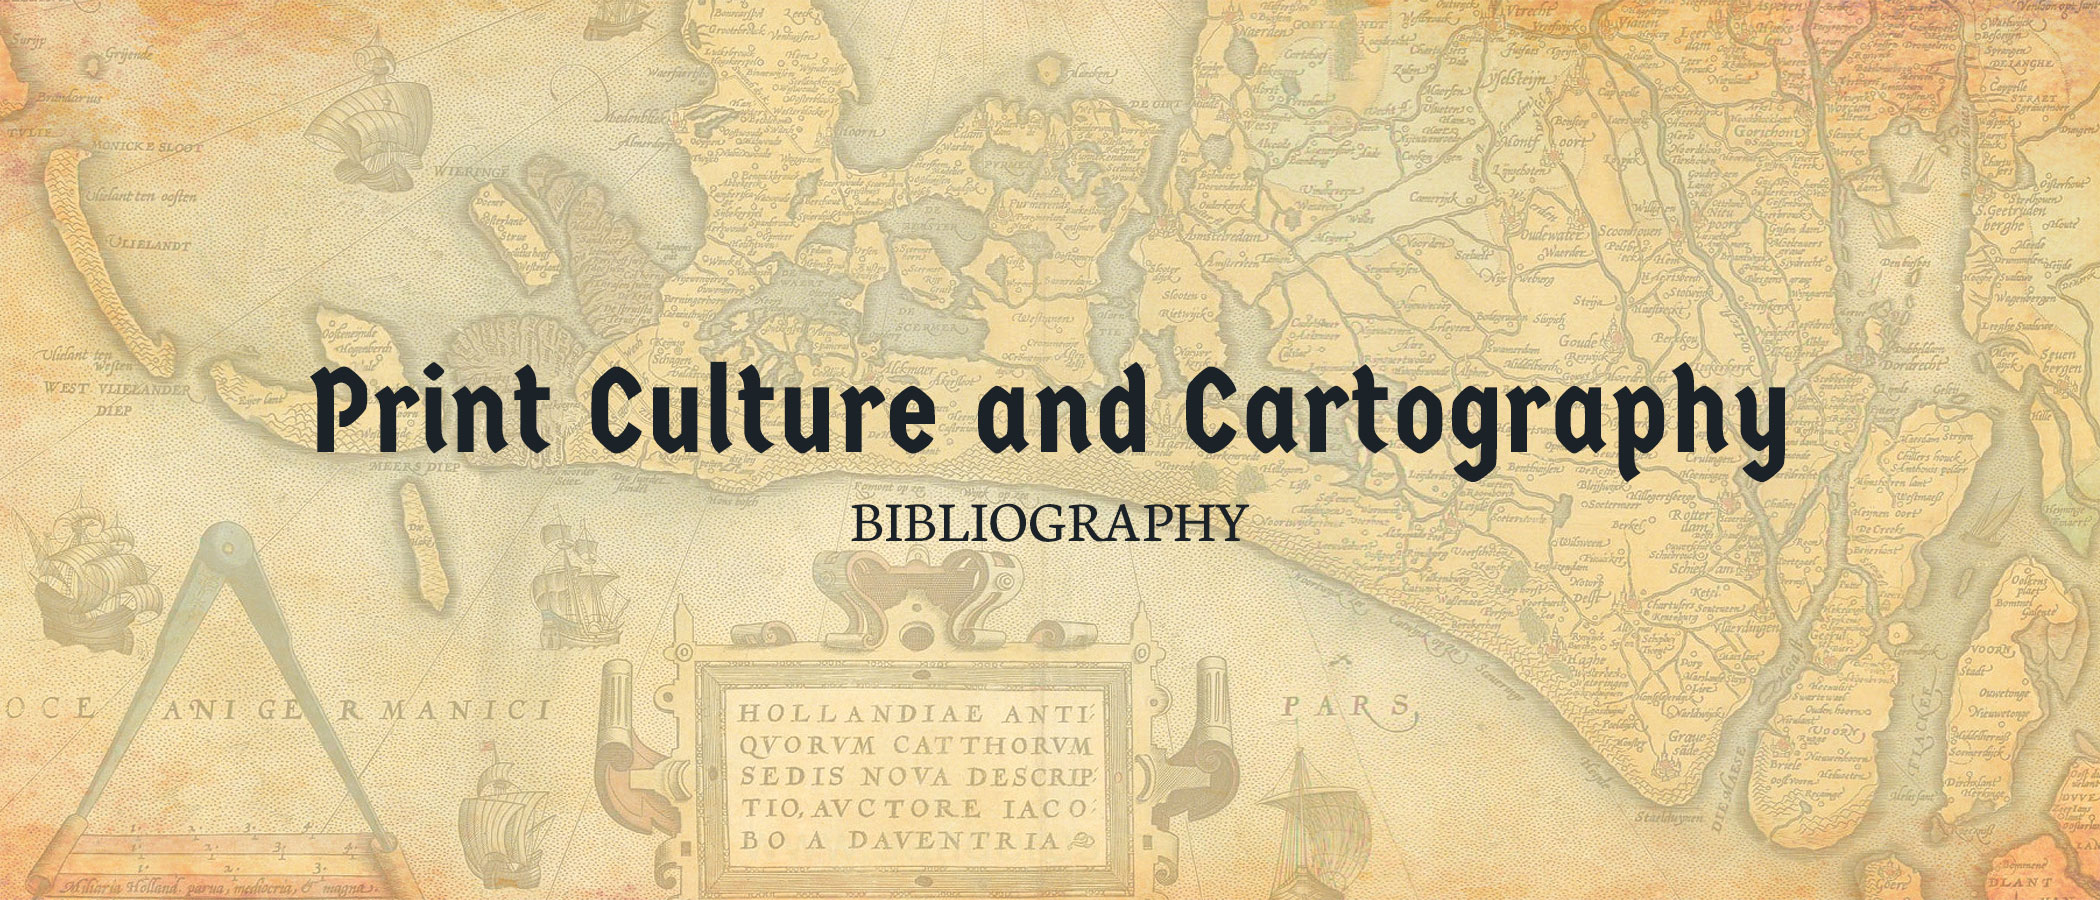 Bibliography 05: Print Culture and Cartography